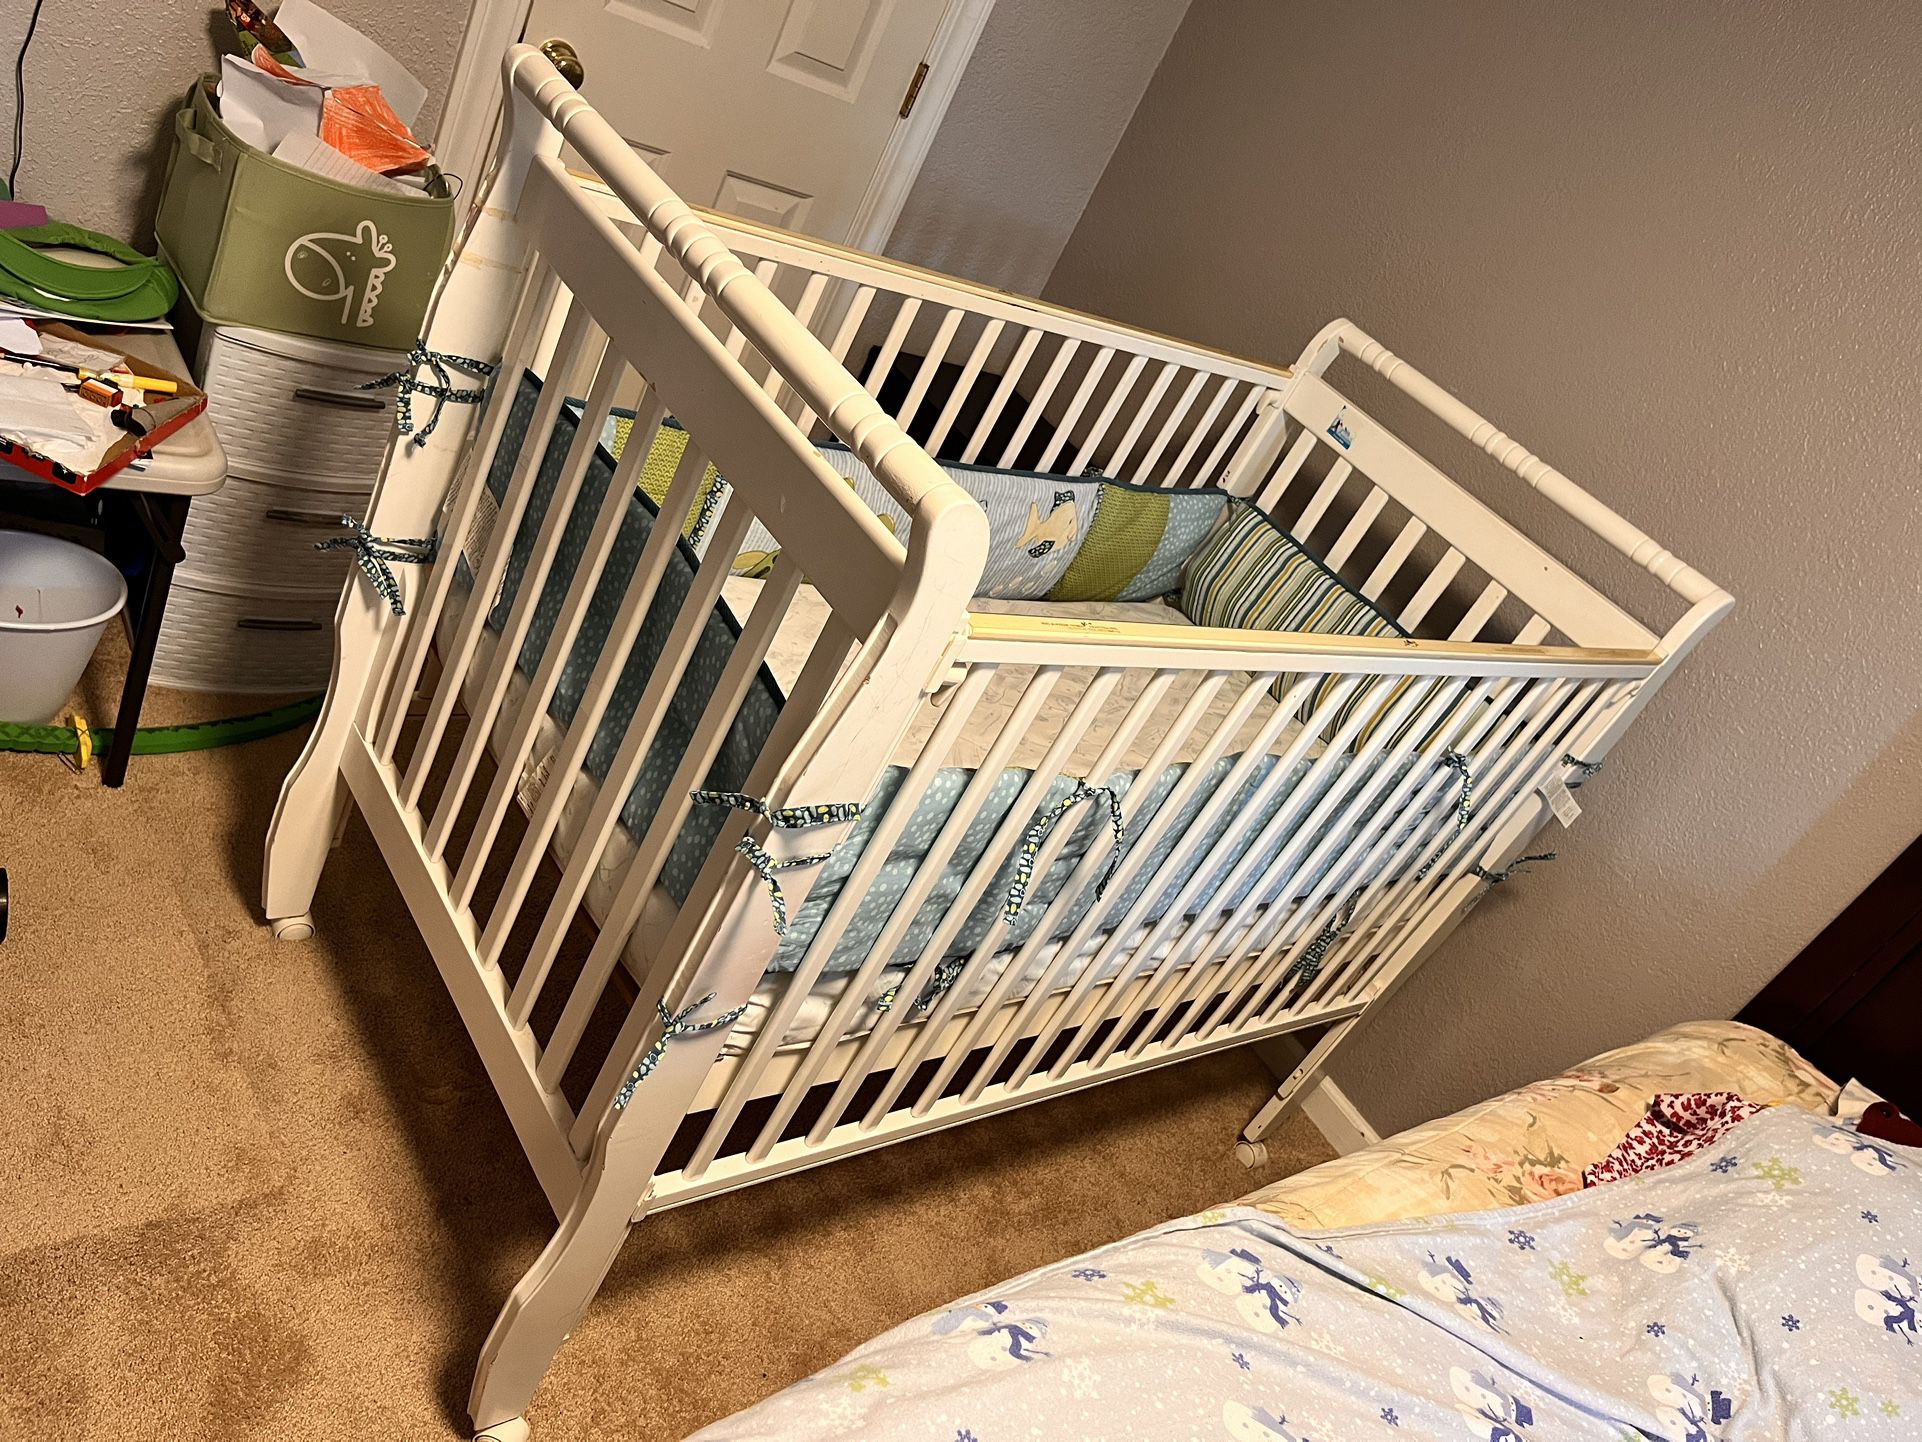 Convertible Crib, Converts From Baby Crib to Toddler Bed - White - Toddler